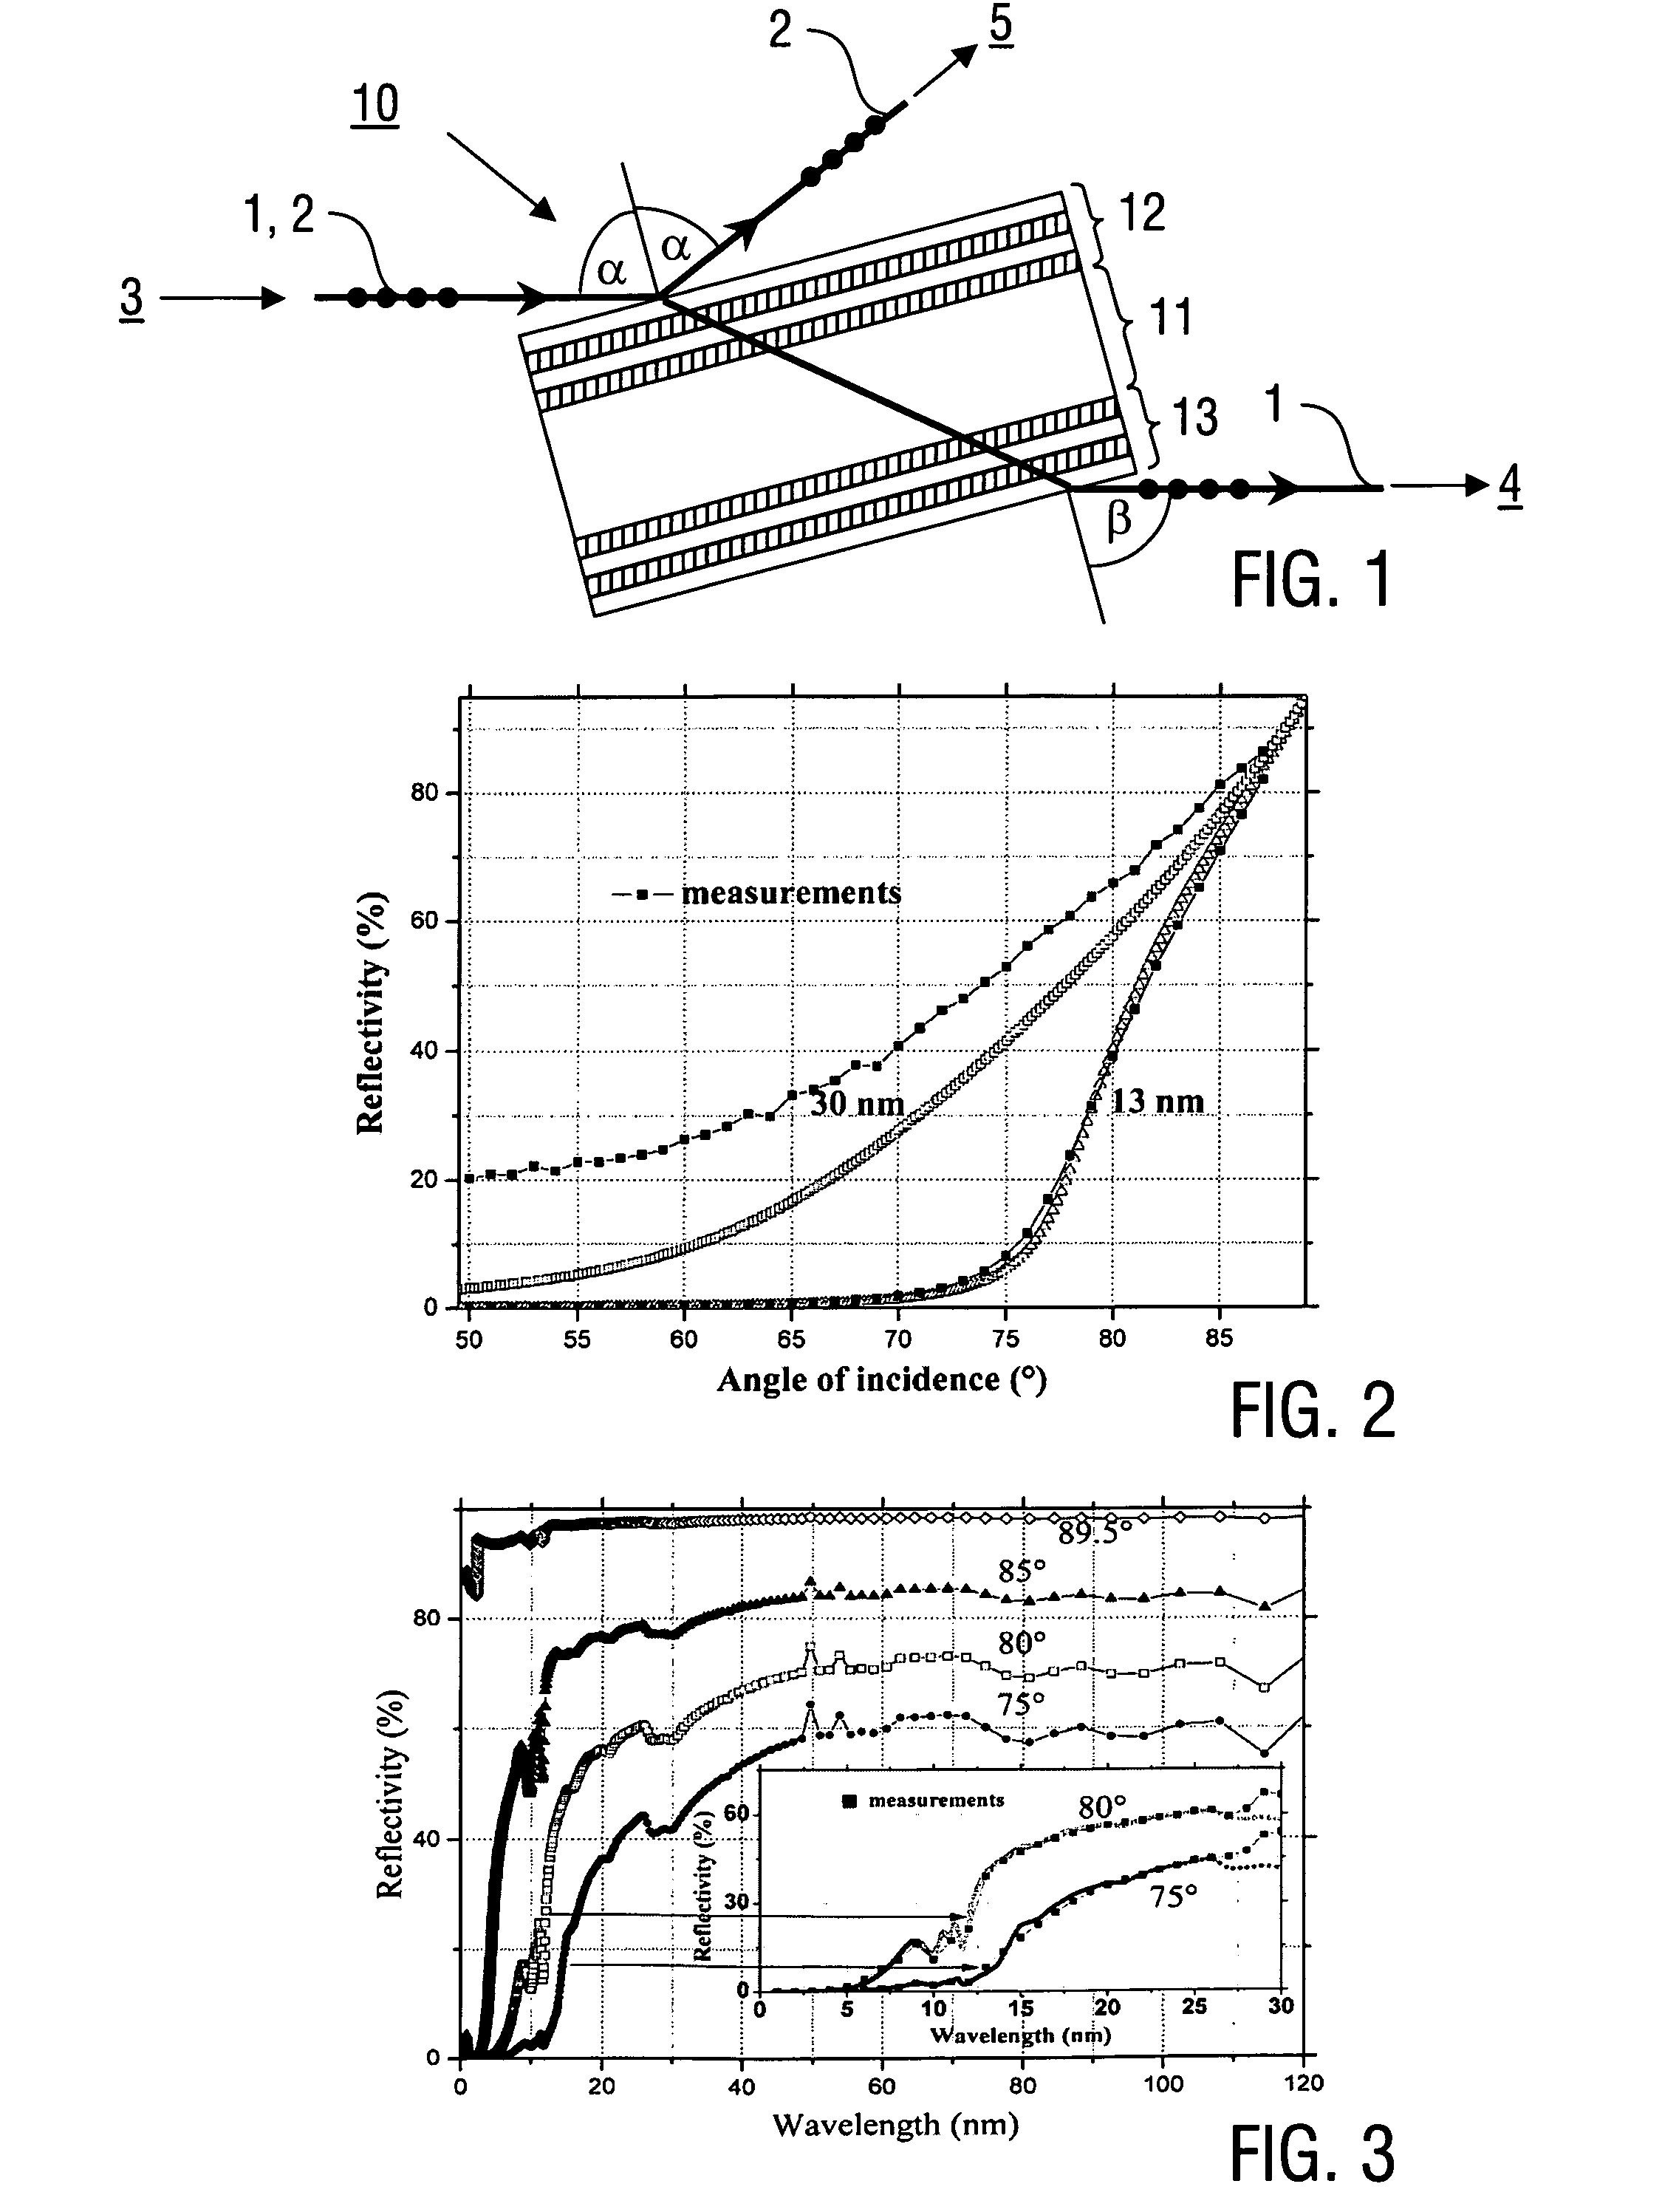 Spatially relaying radiation components